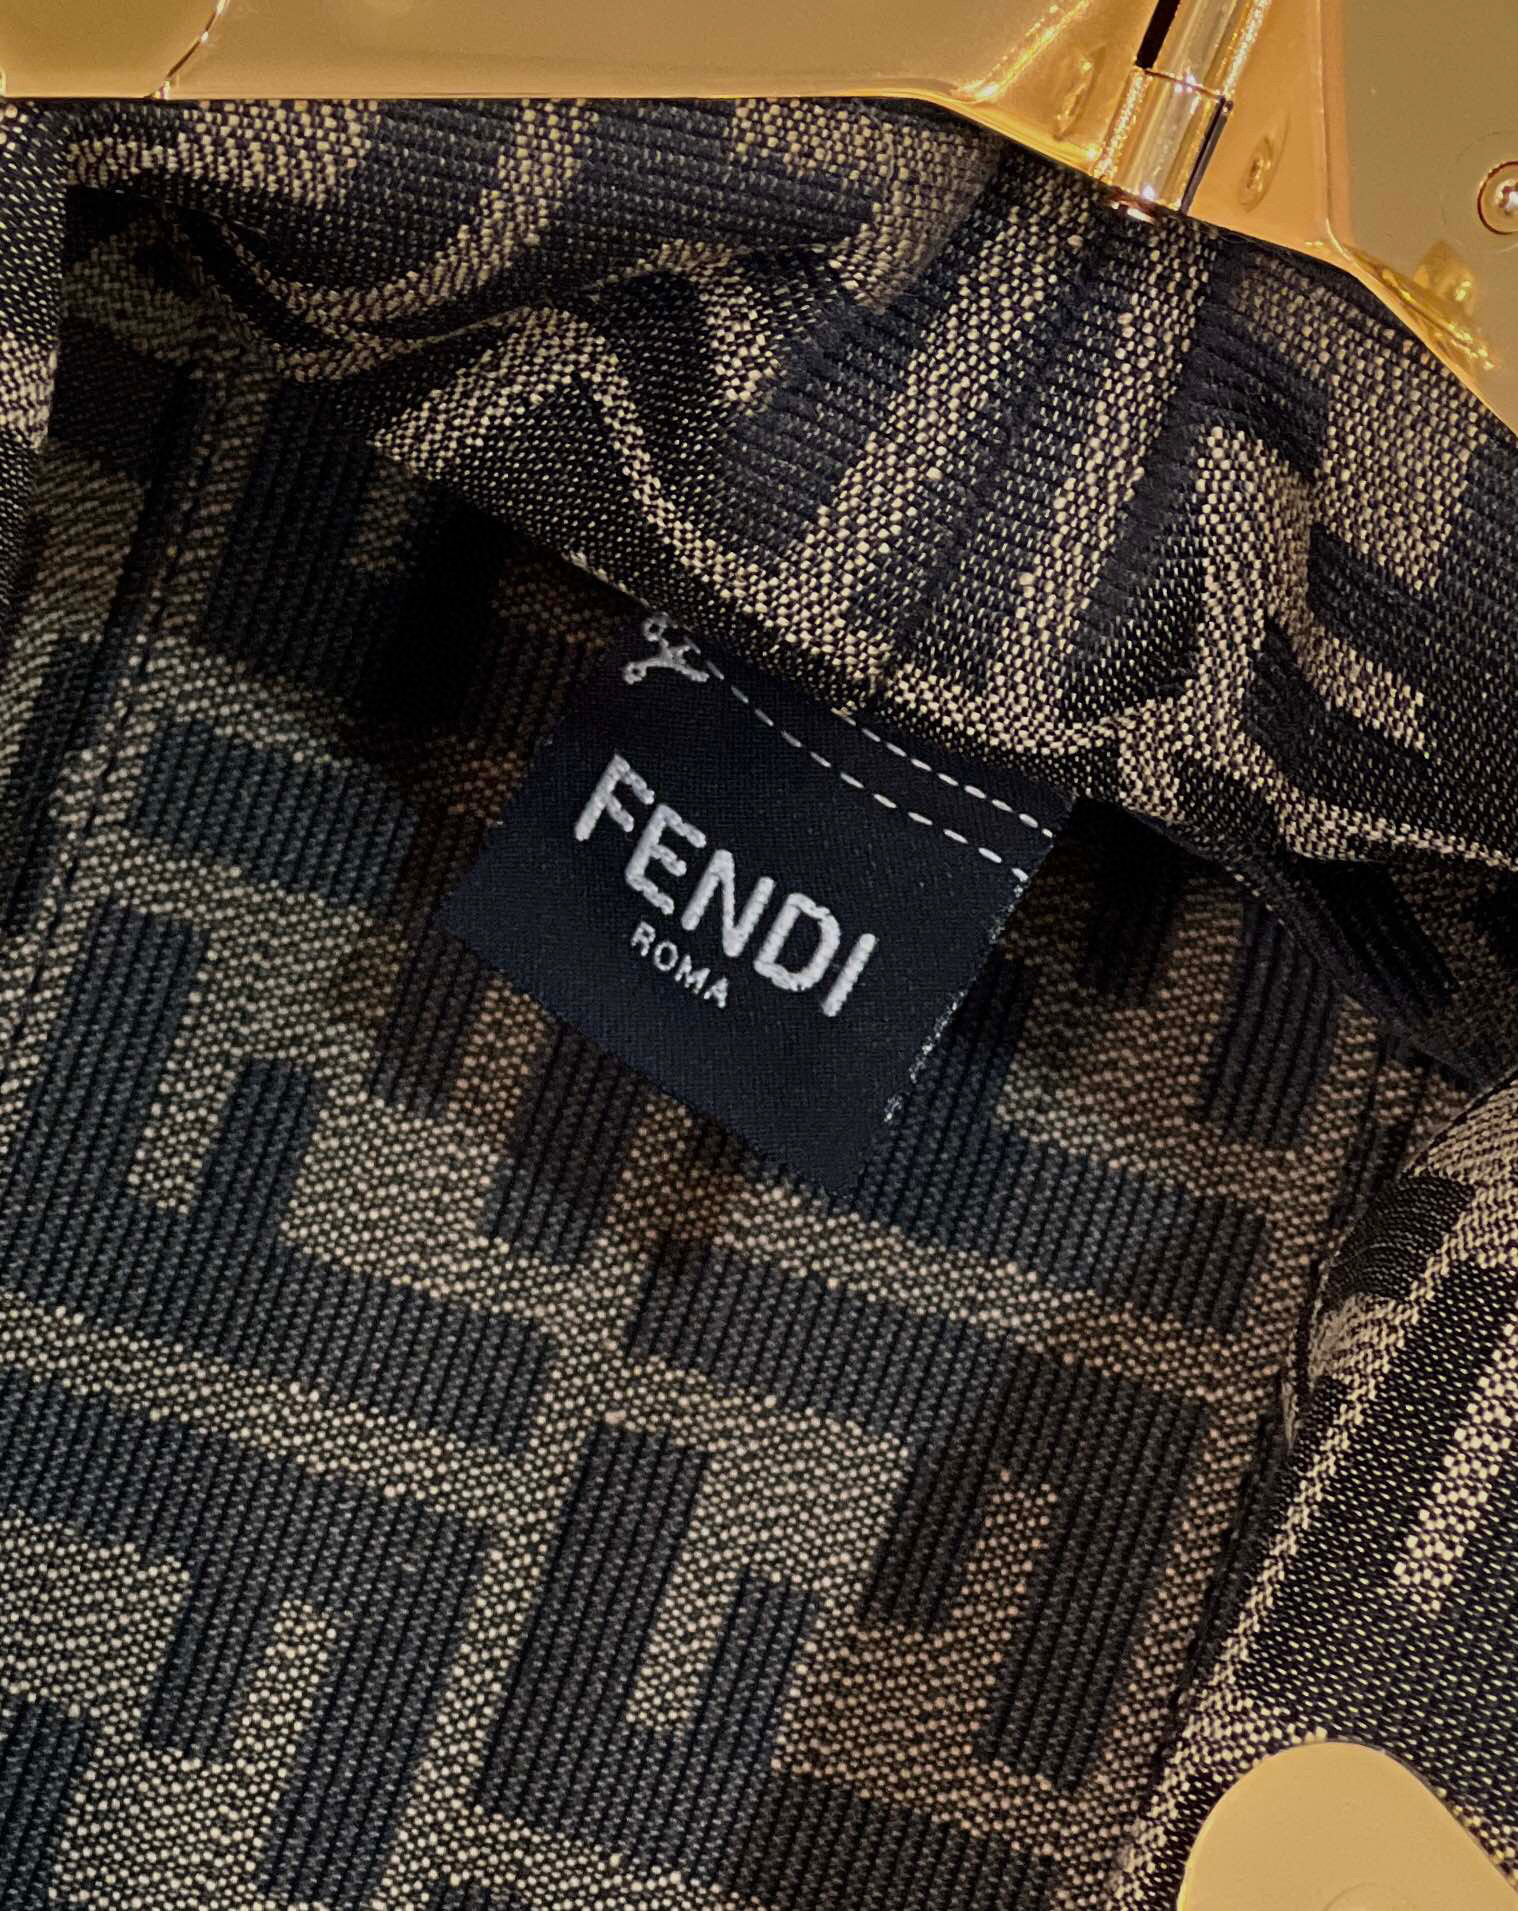 Fendi First Small braided leather bag Green F80103